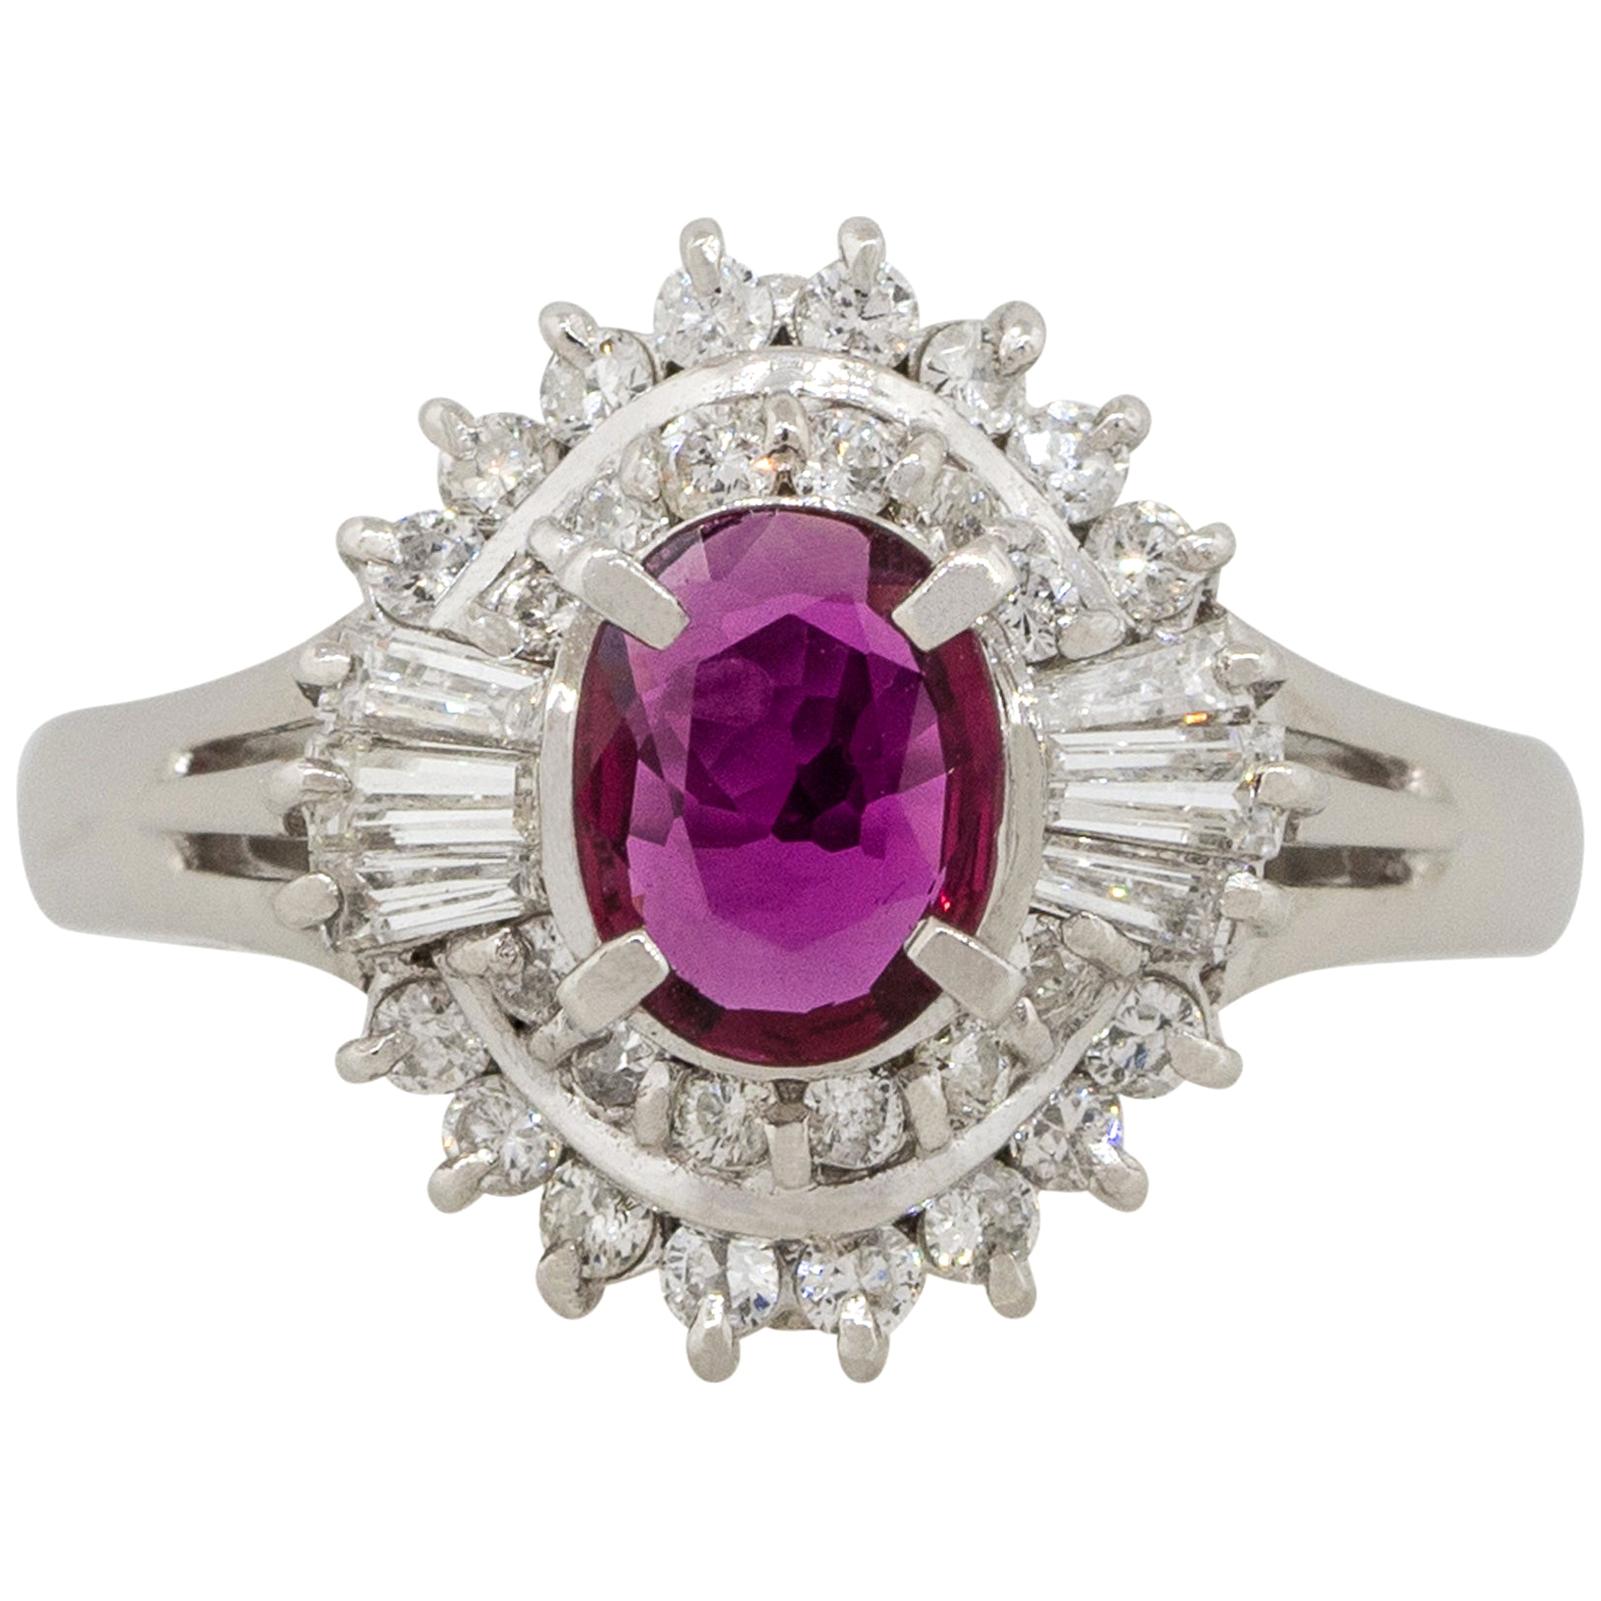 0.57 Carat Oval Ruby Center Diamond Cocktail Ring Platinum in Stock For Sale